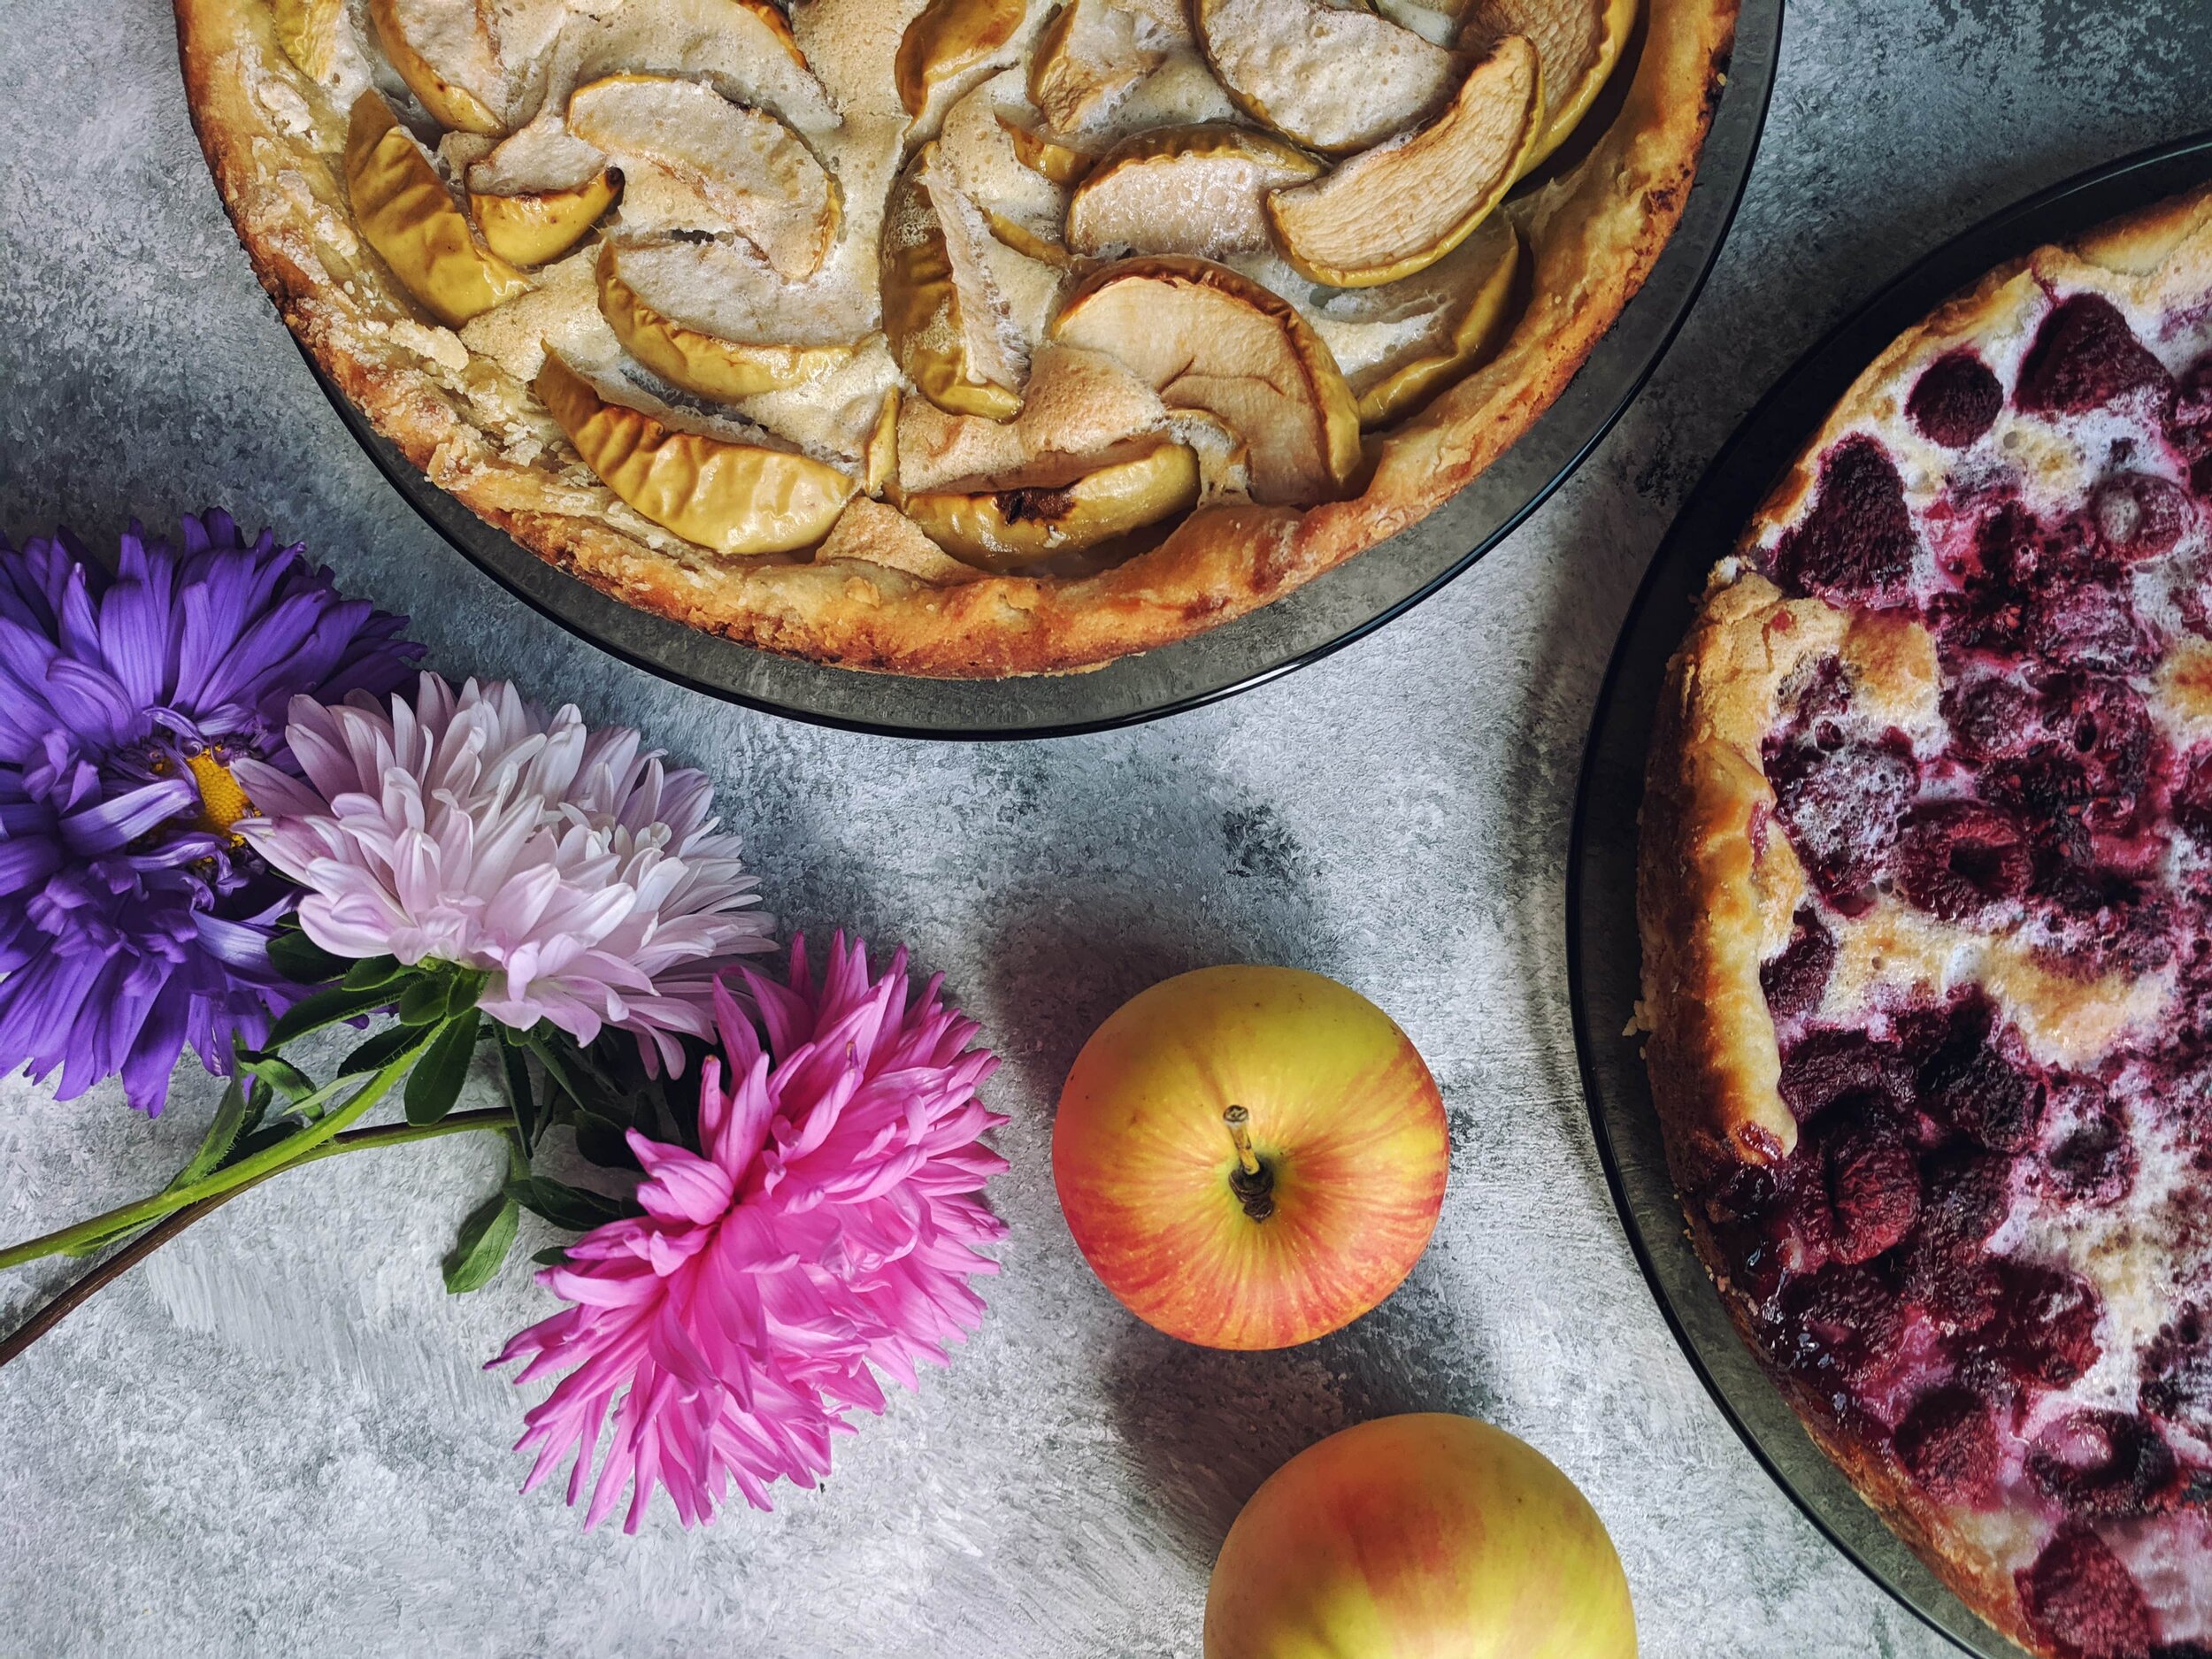 purple and pink flowers beside two freshly baked pies, apple and raspberry